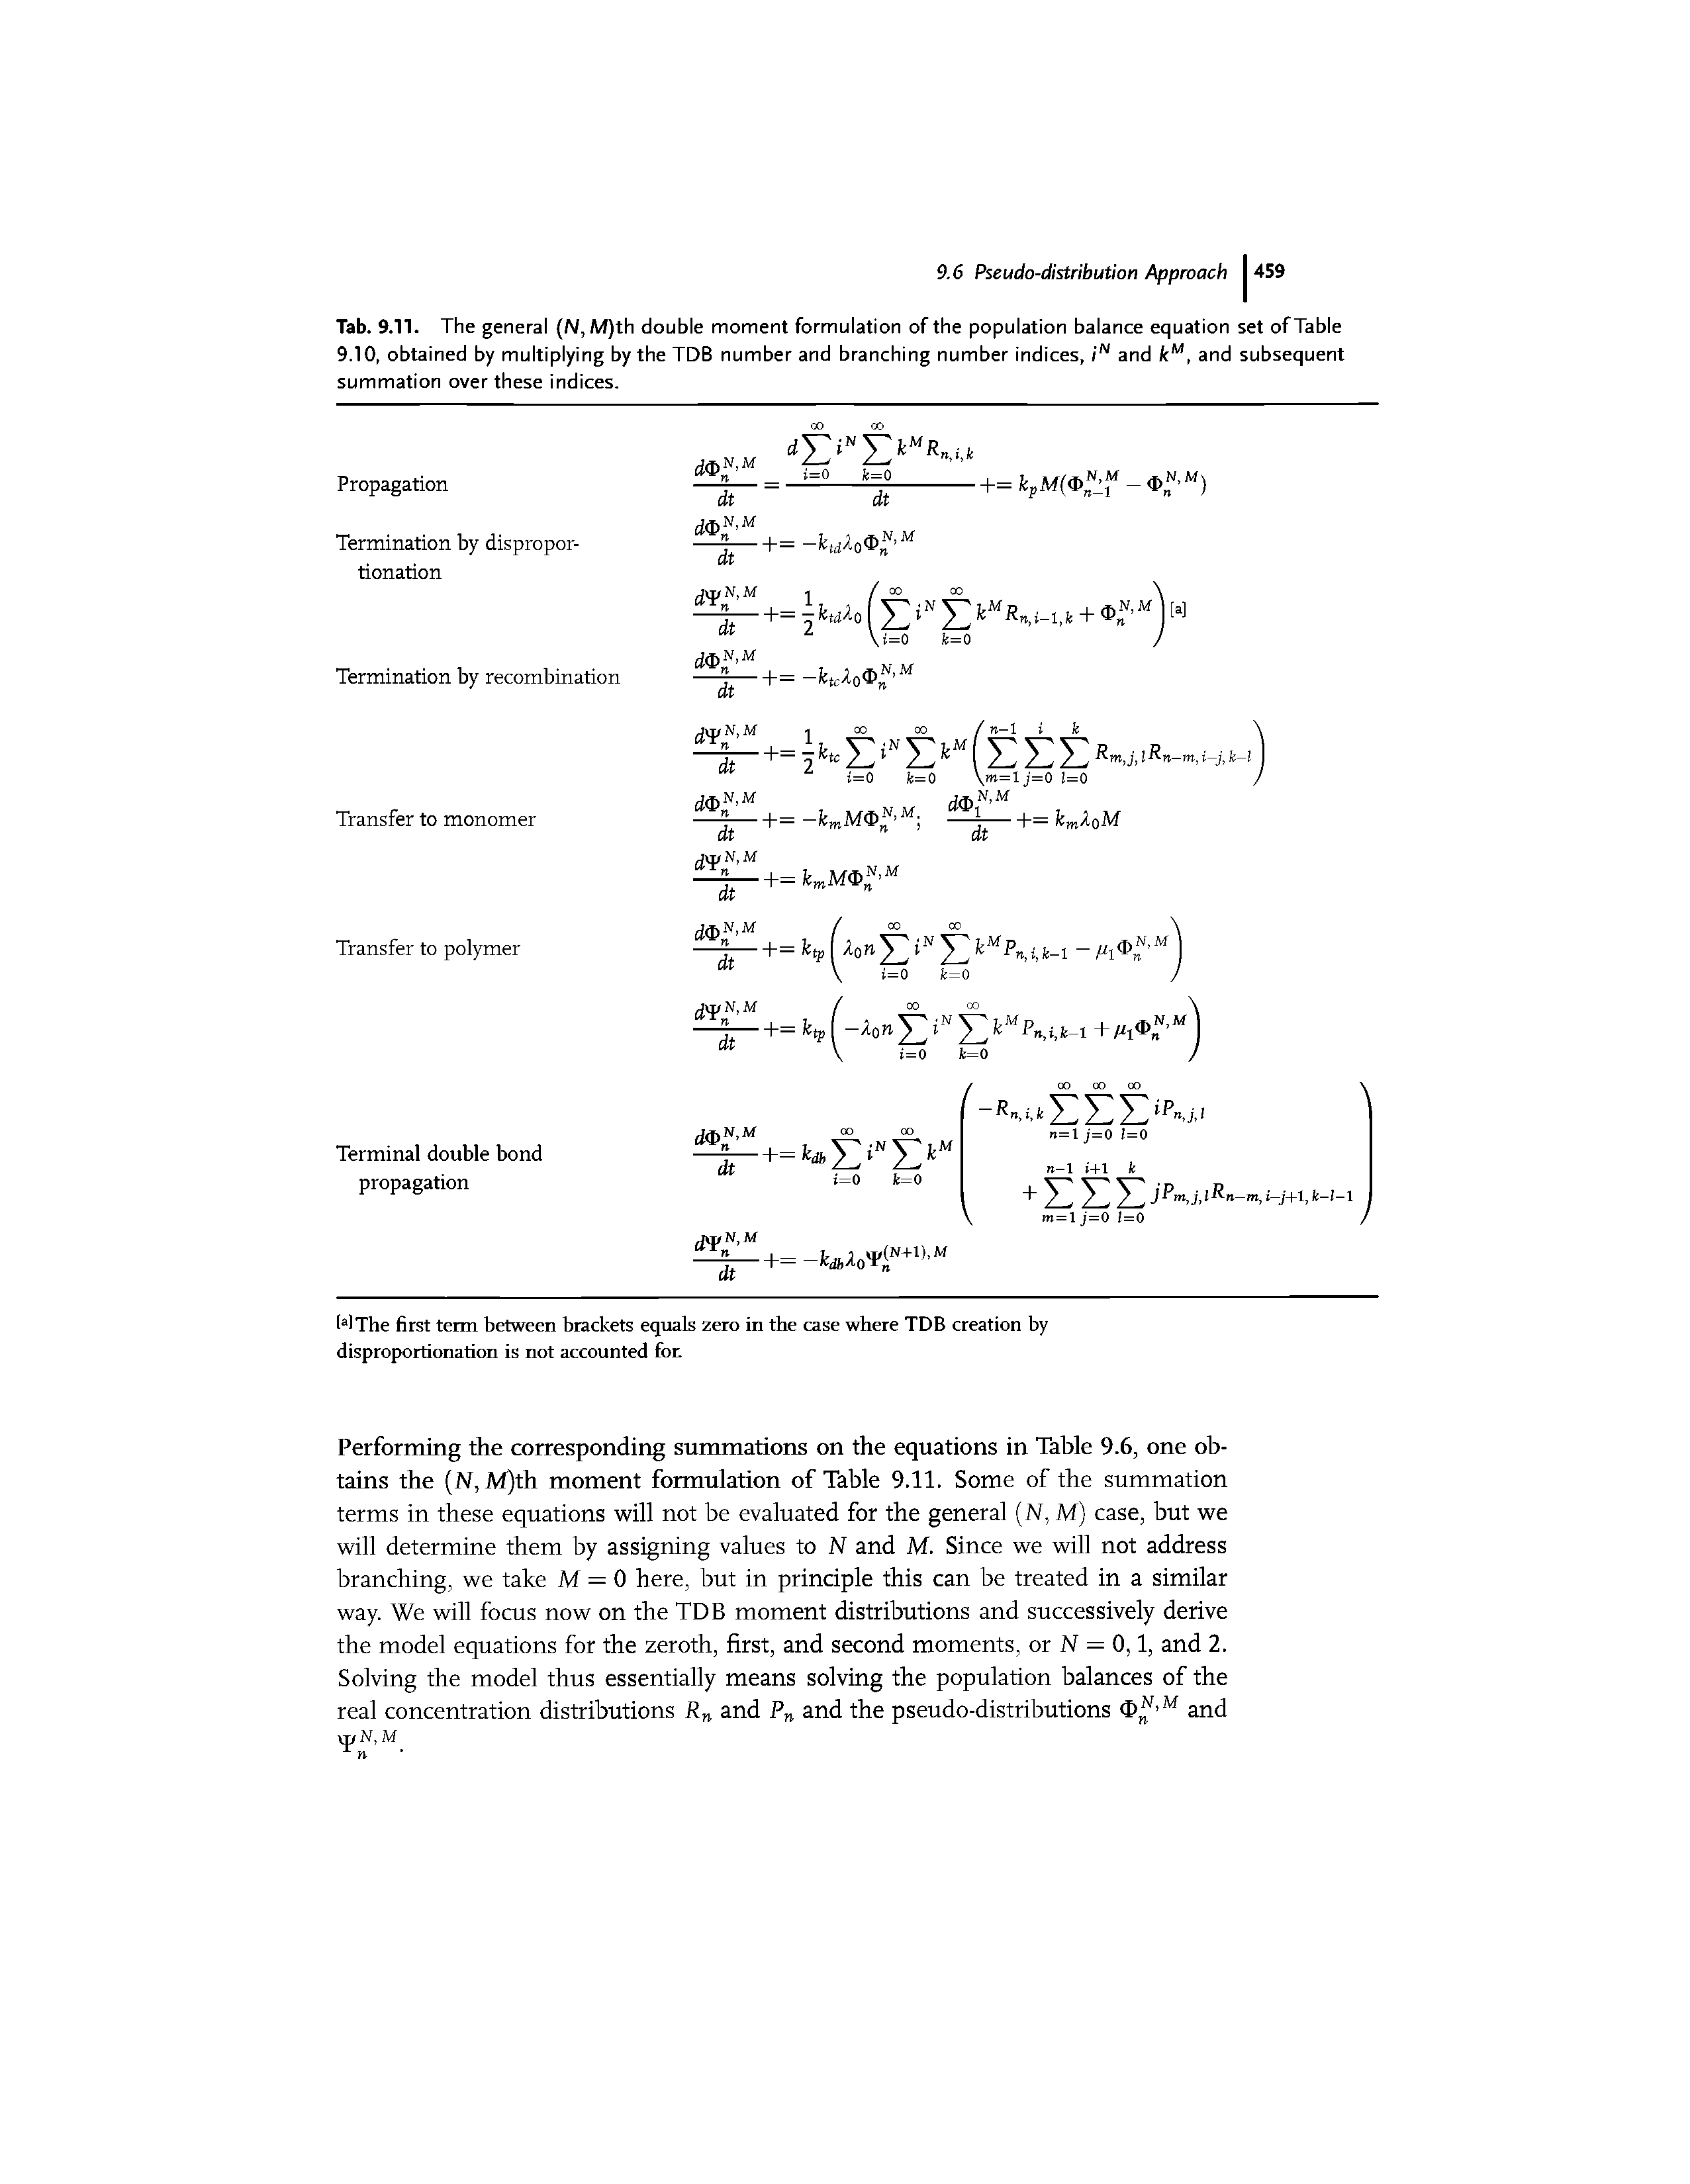 Tab. 9.11. The general (N, M)th double moment formulation of the population balance equation set of Table 9.10, obtained by multiplying by the TDB number and branching number indices, / and and subsequent summation over these indices.